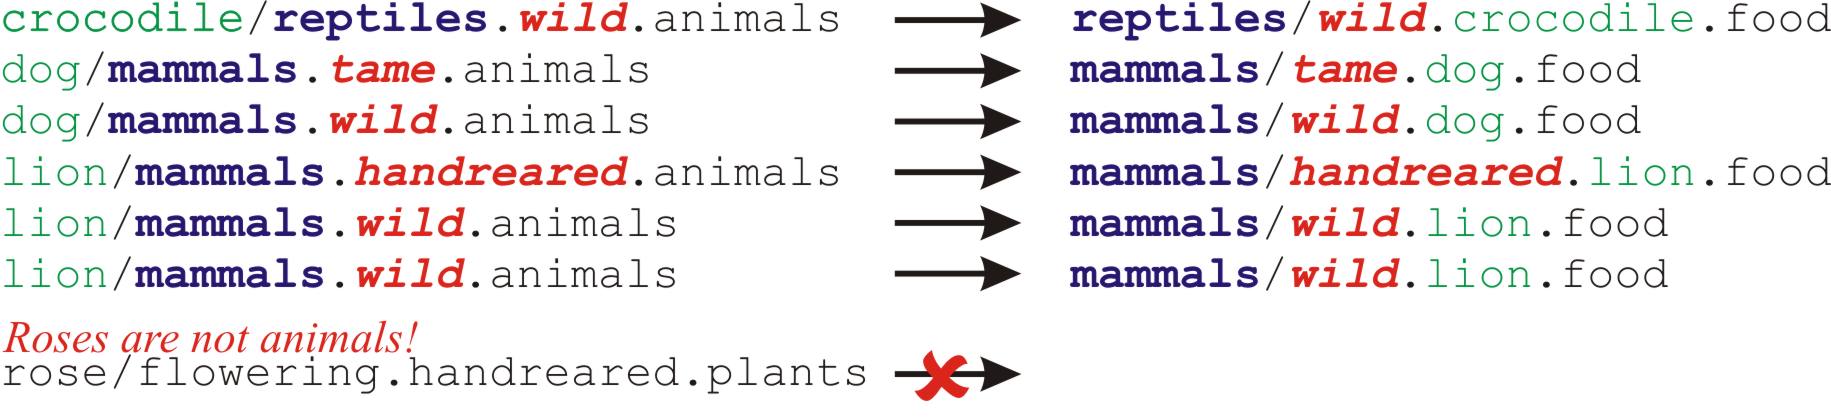 ../../_images/simple_tutorial_zoo_animals_formatter_example.jpg